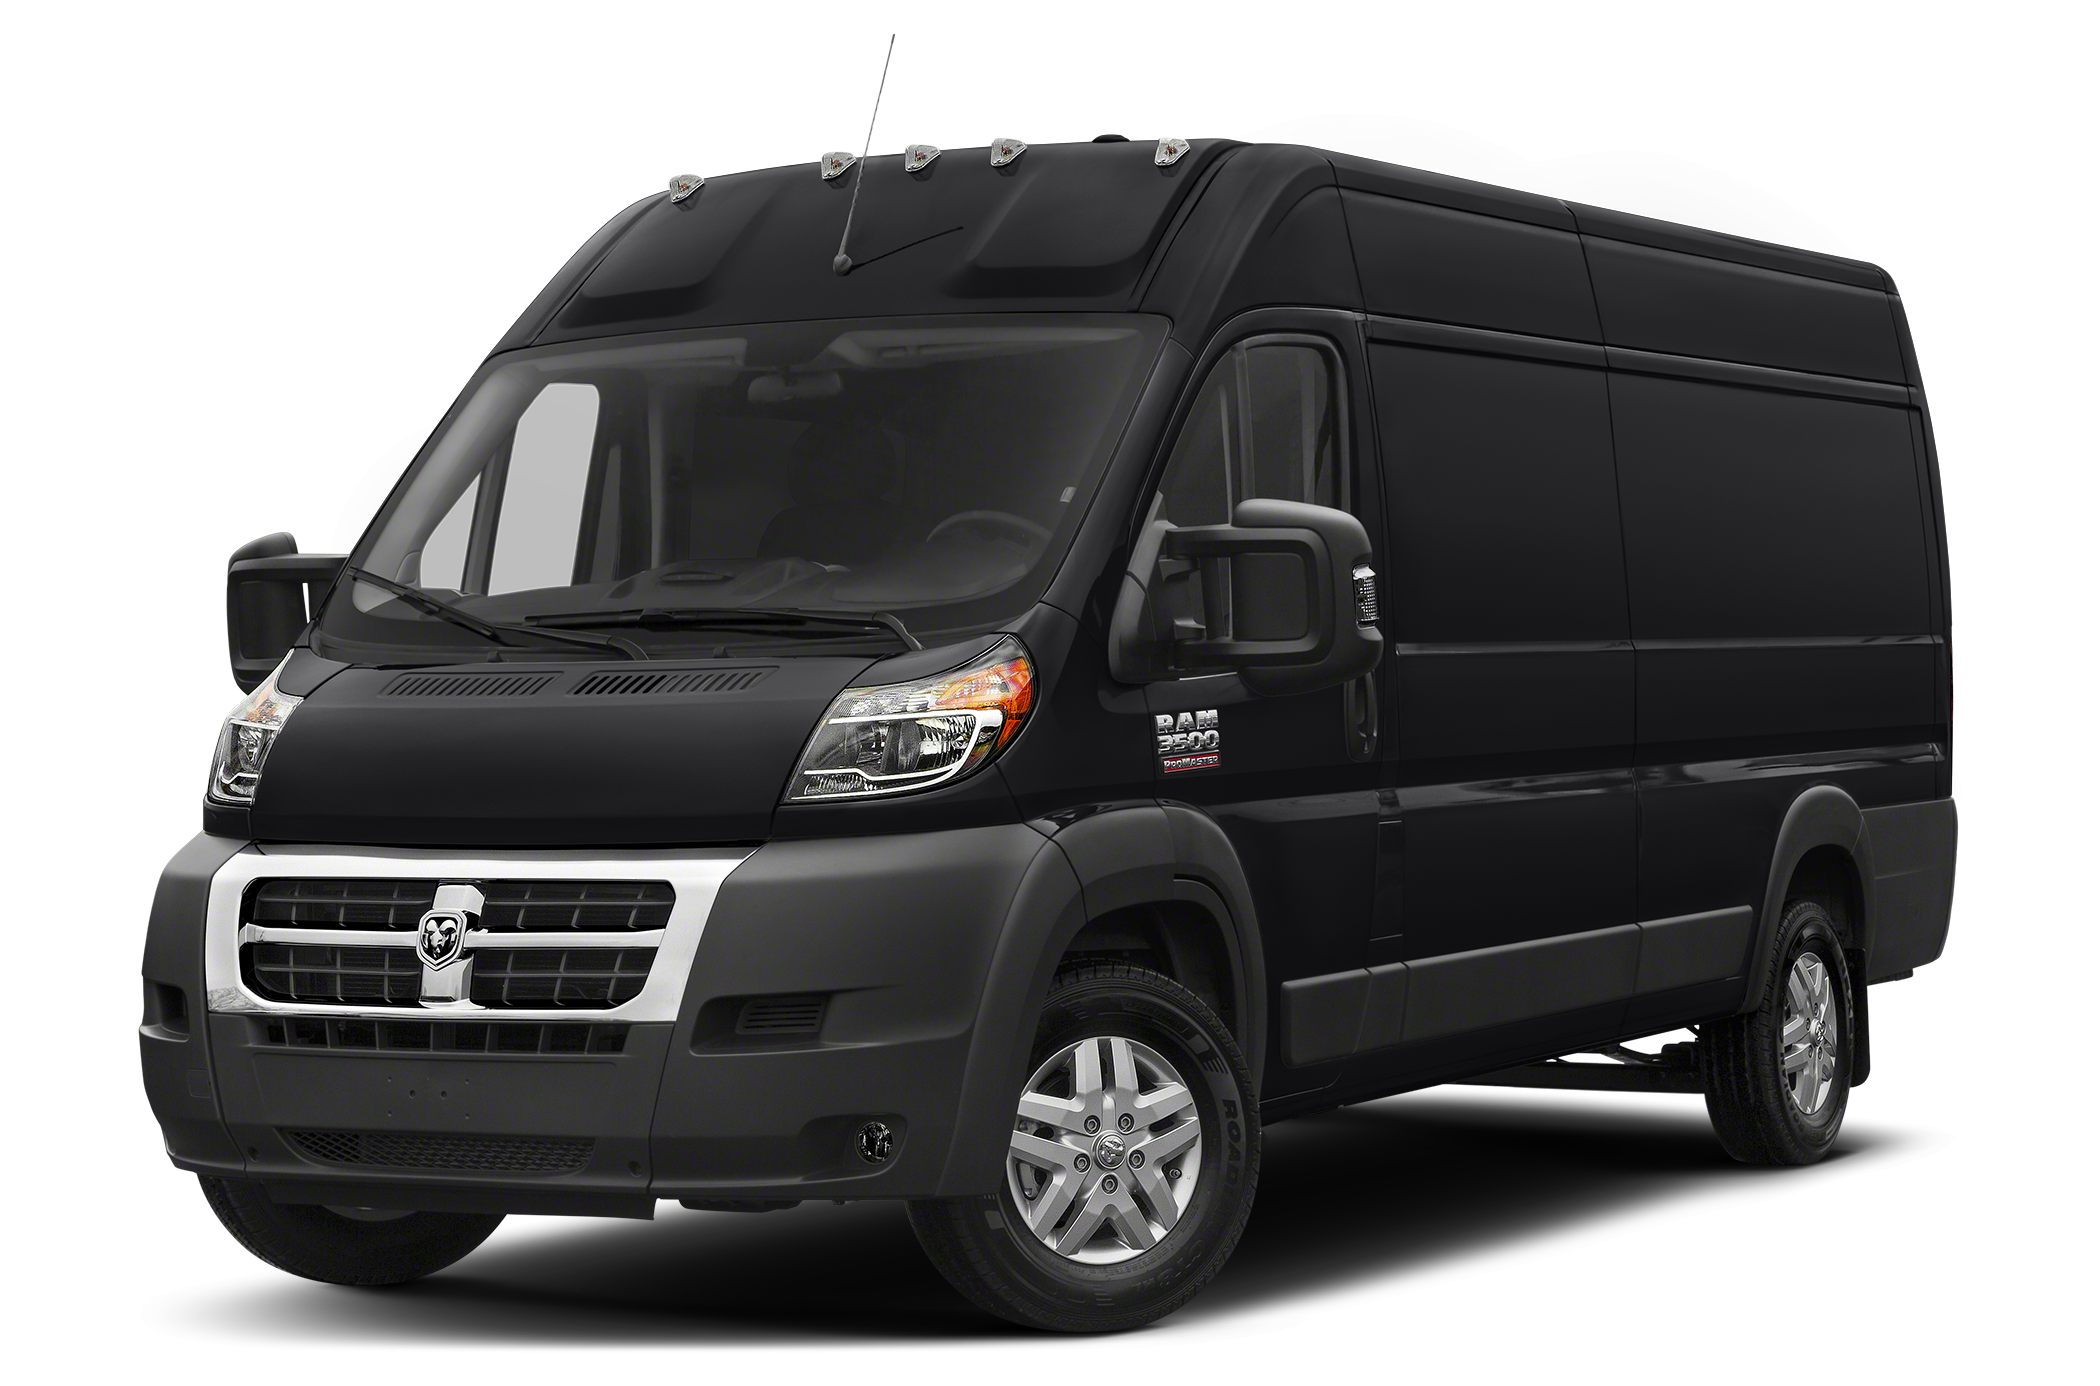 2014 Ram Promaster-3500 oem parts and accessories on sale